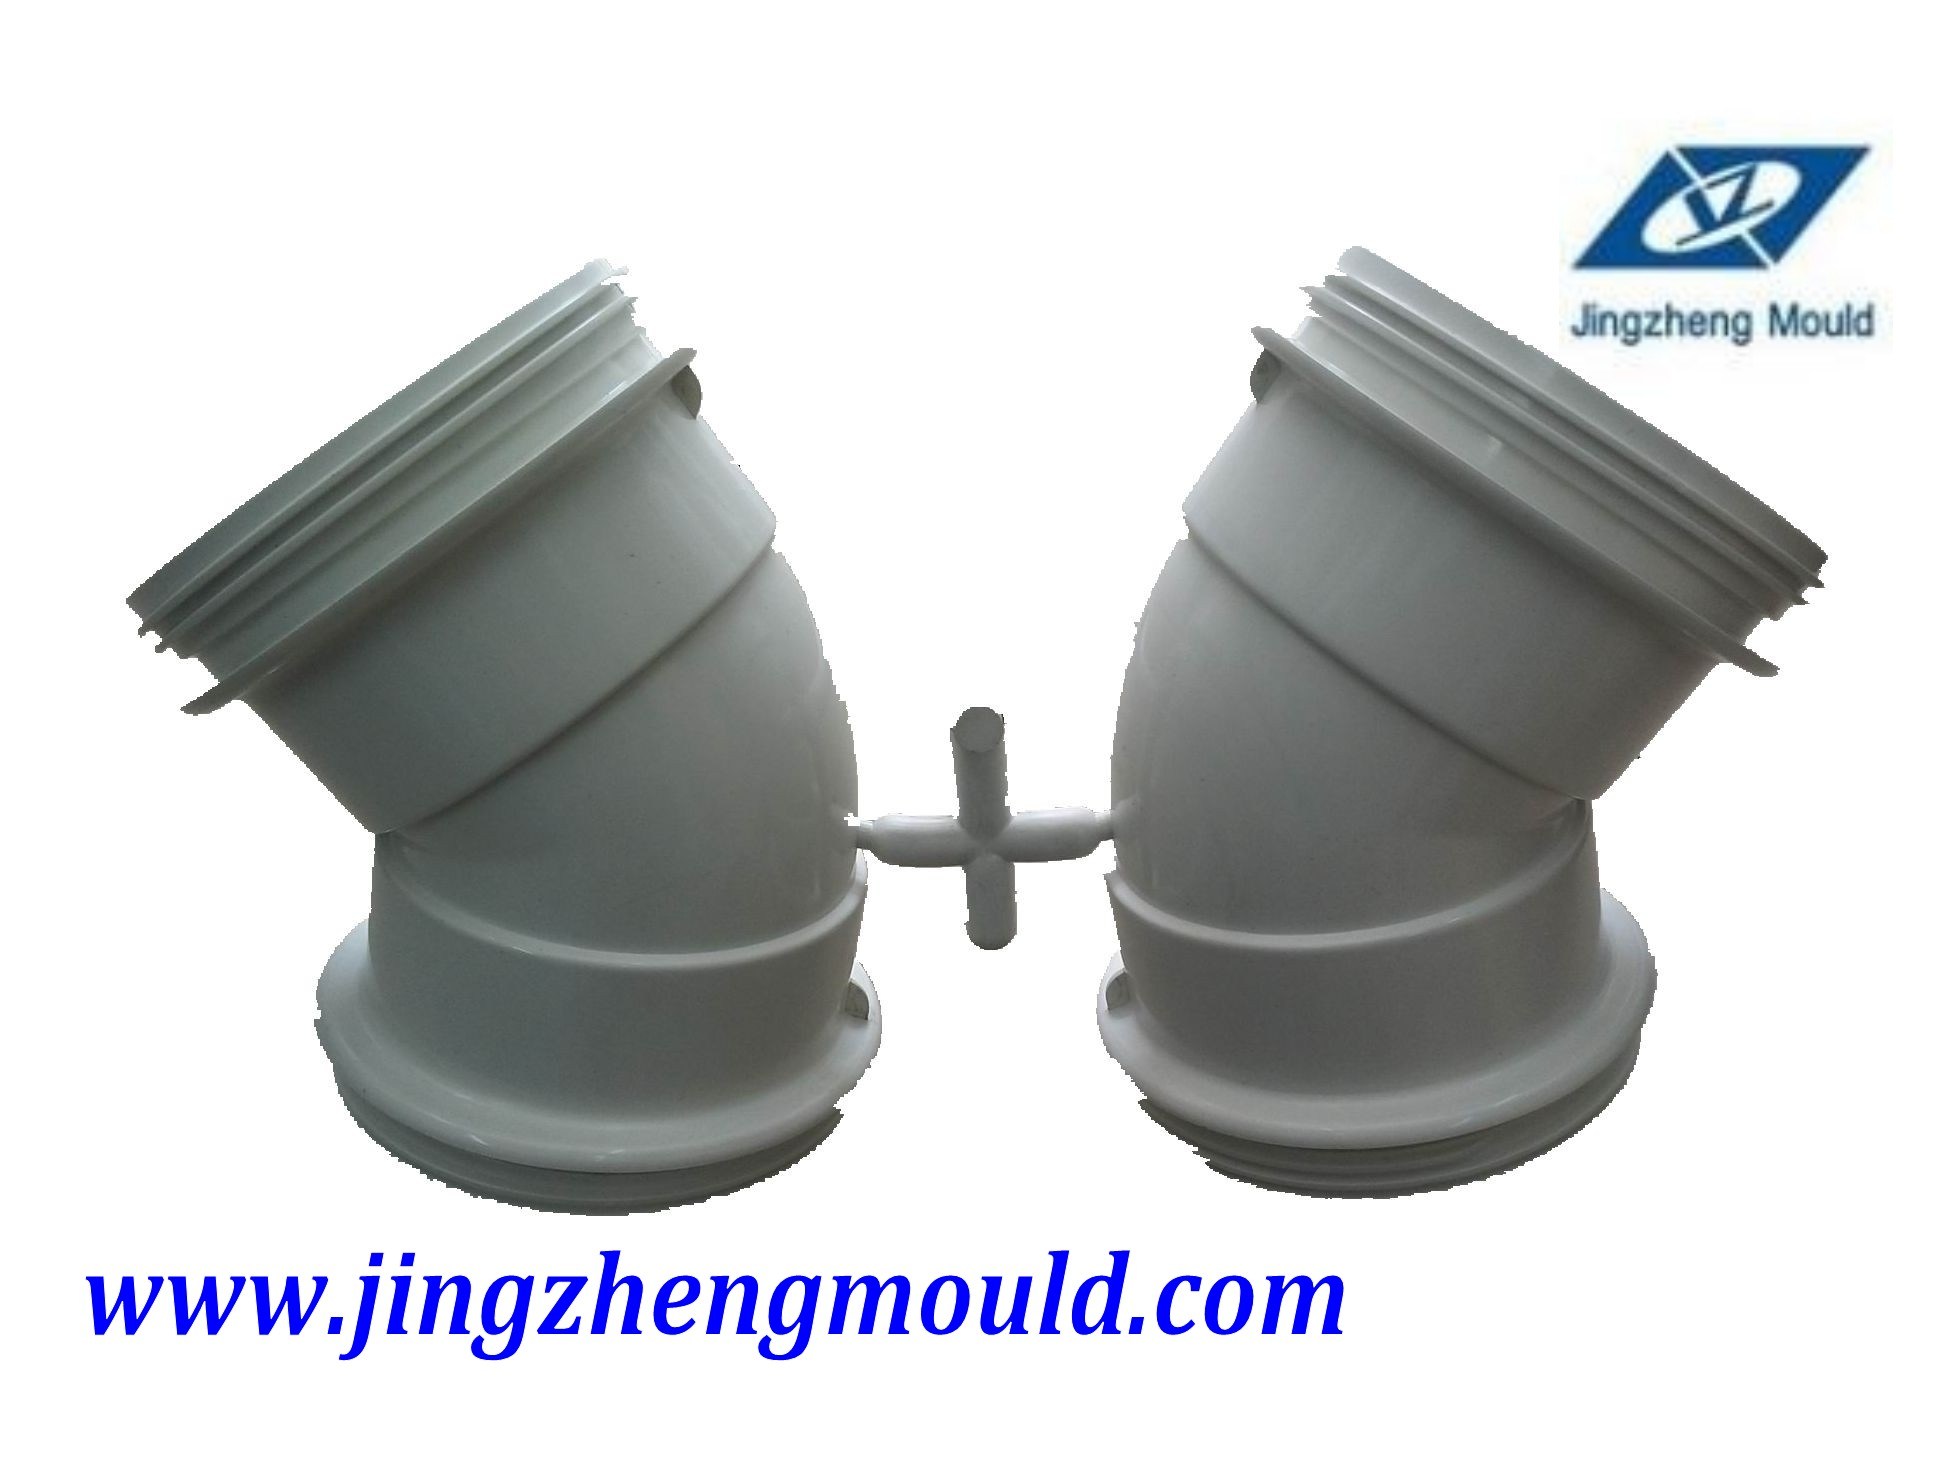 PVC 63mm Elbow Pipe Fitting Mould with 2316 Steel